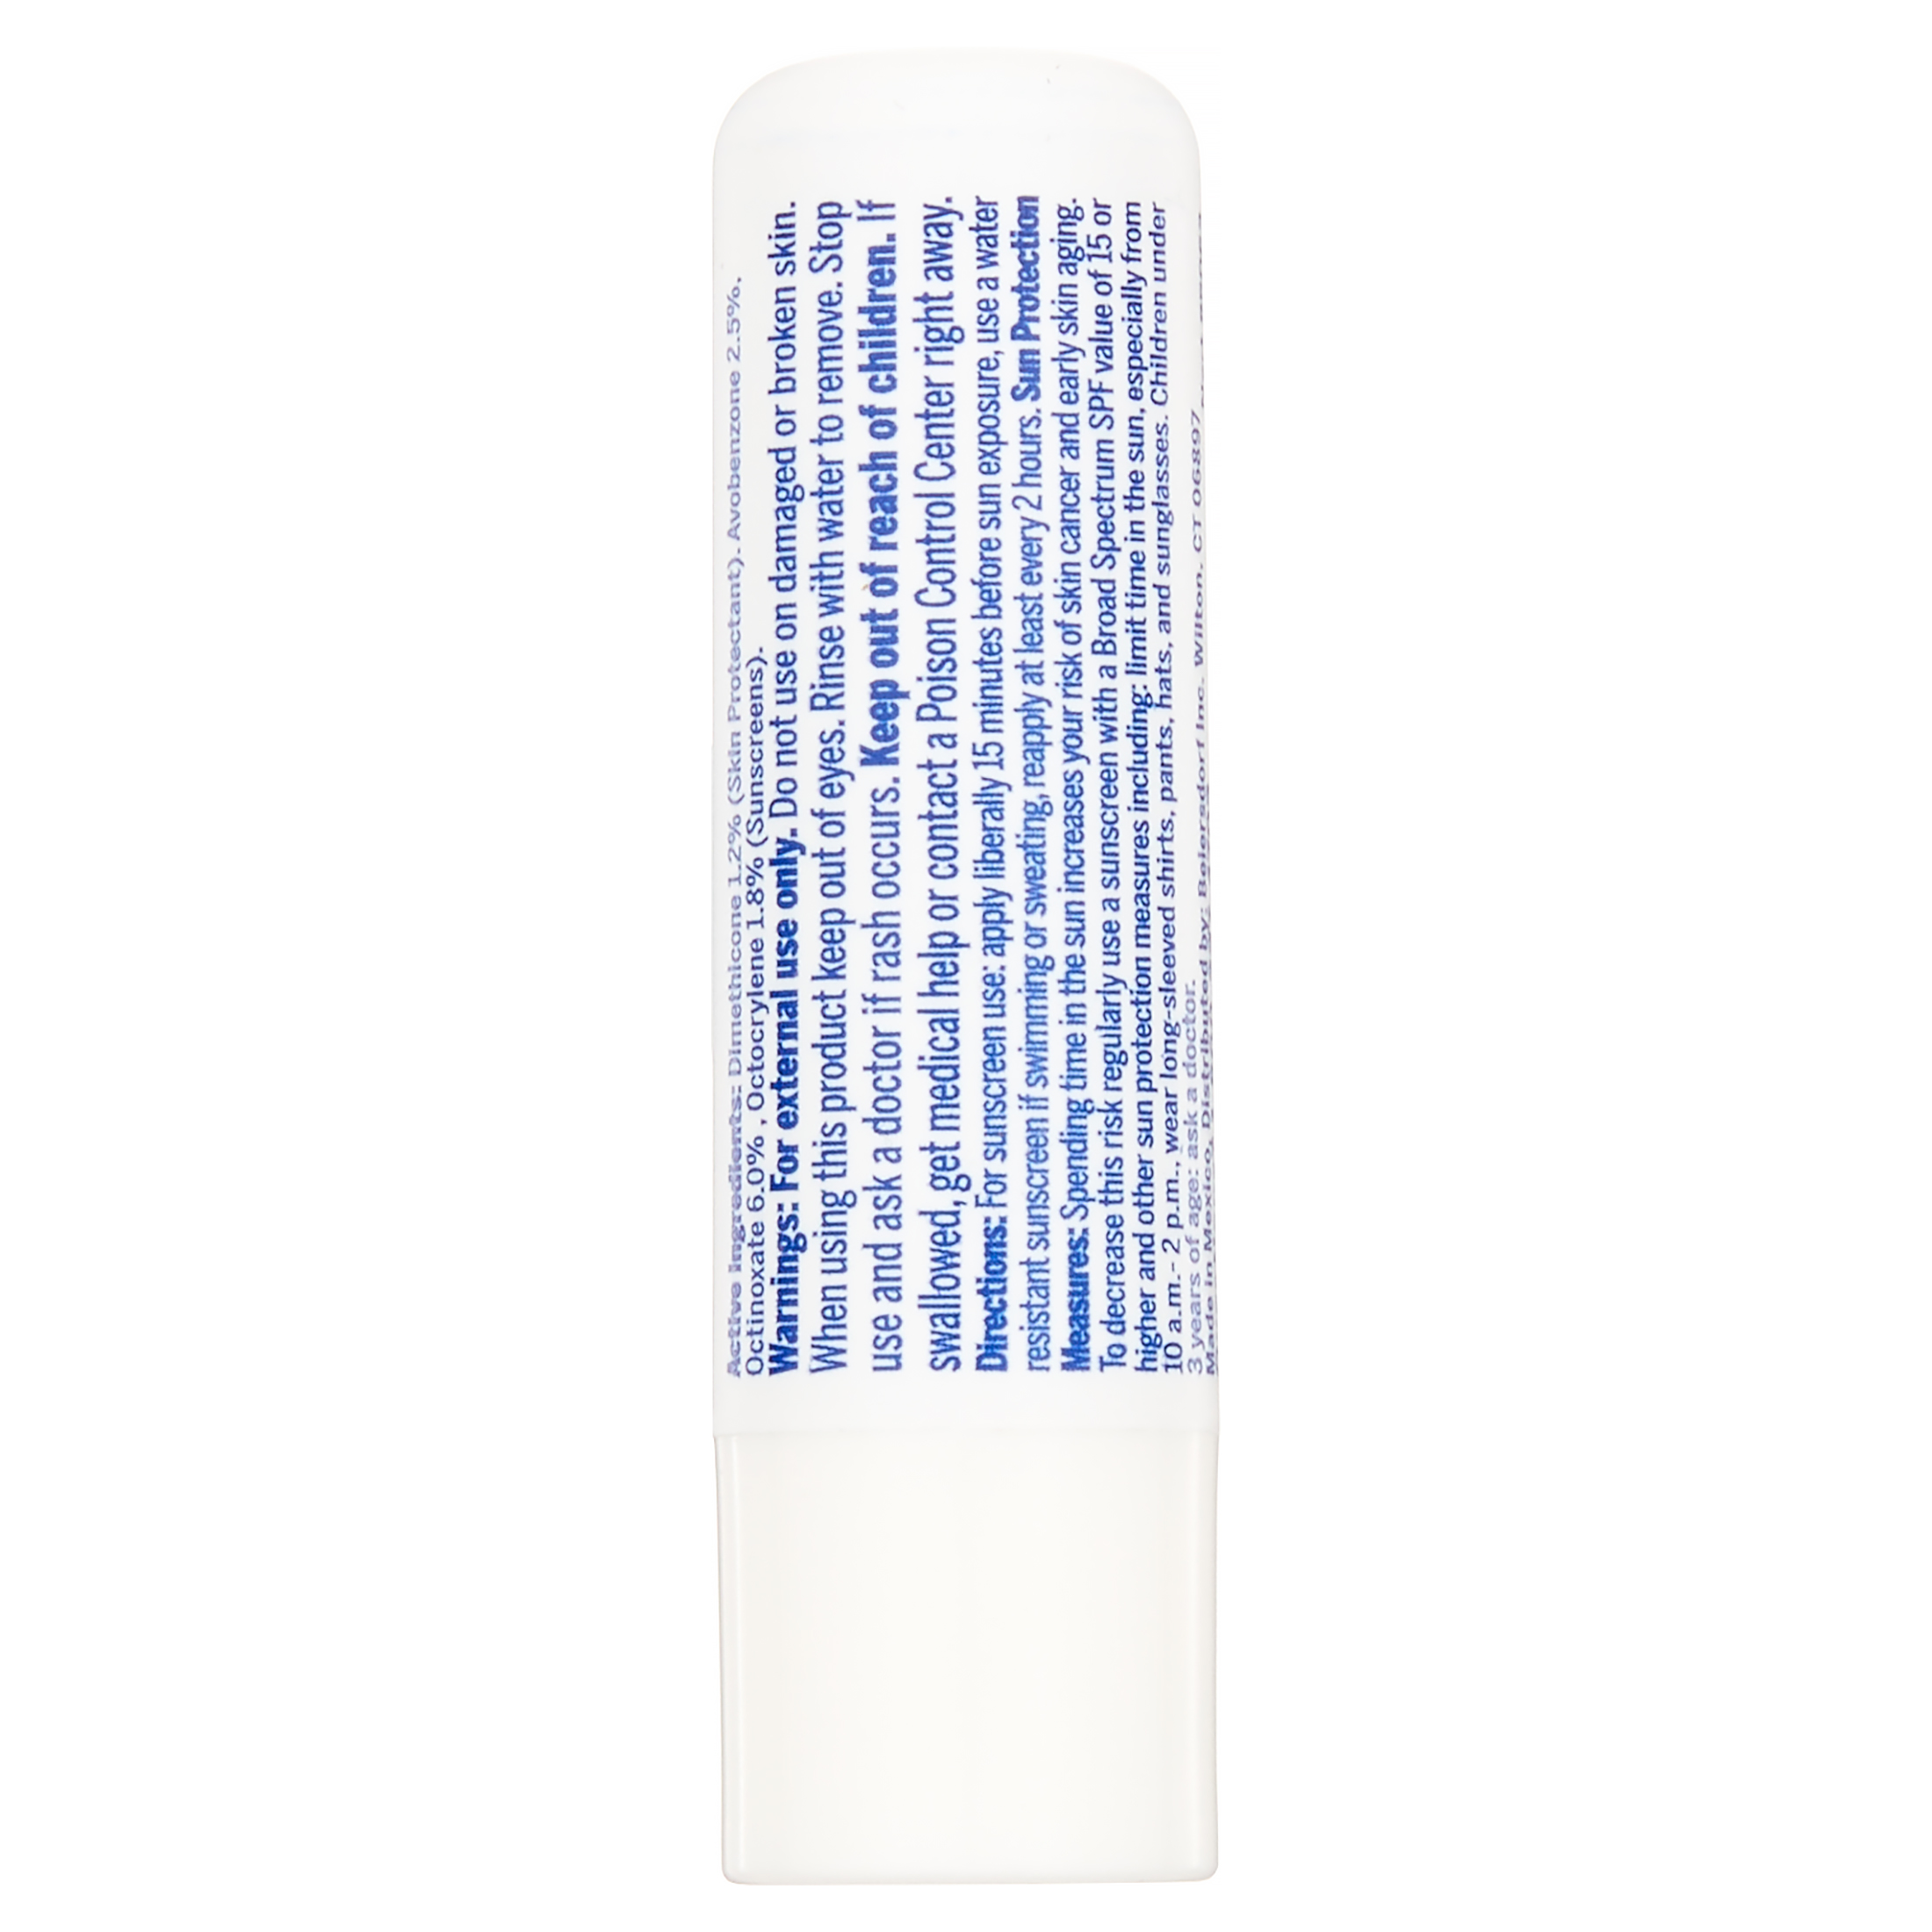 NIVEA Recovery Medicated Lip Care SPF 15 0.17 Carded Pack - image 5 of 9